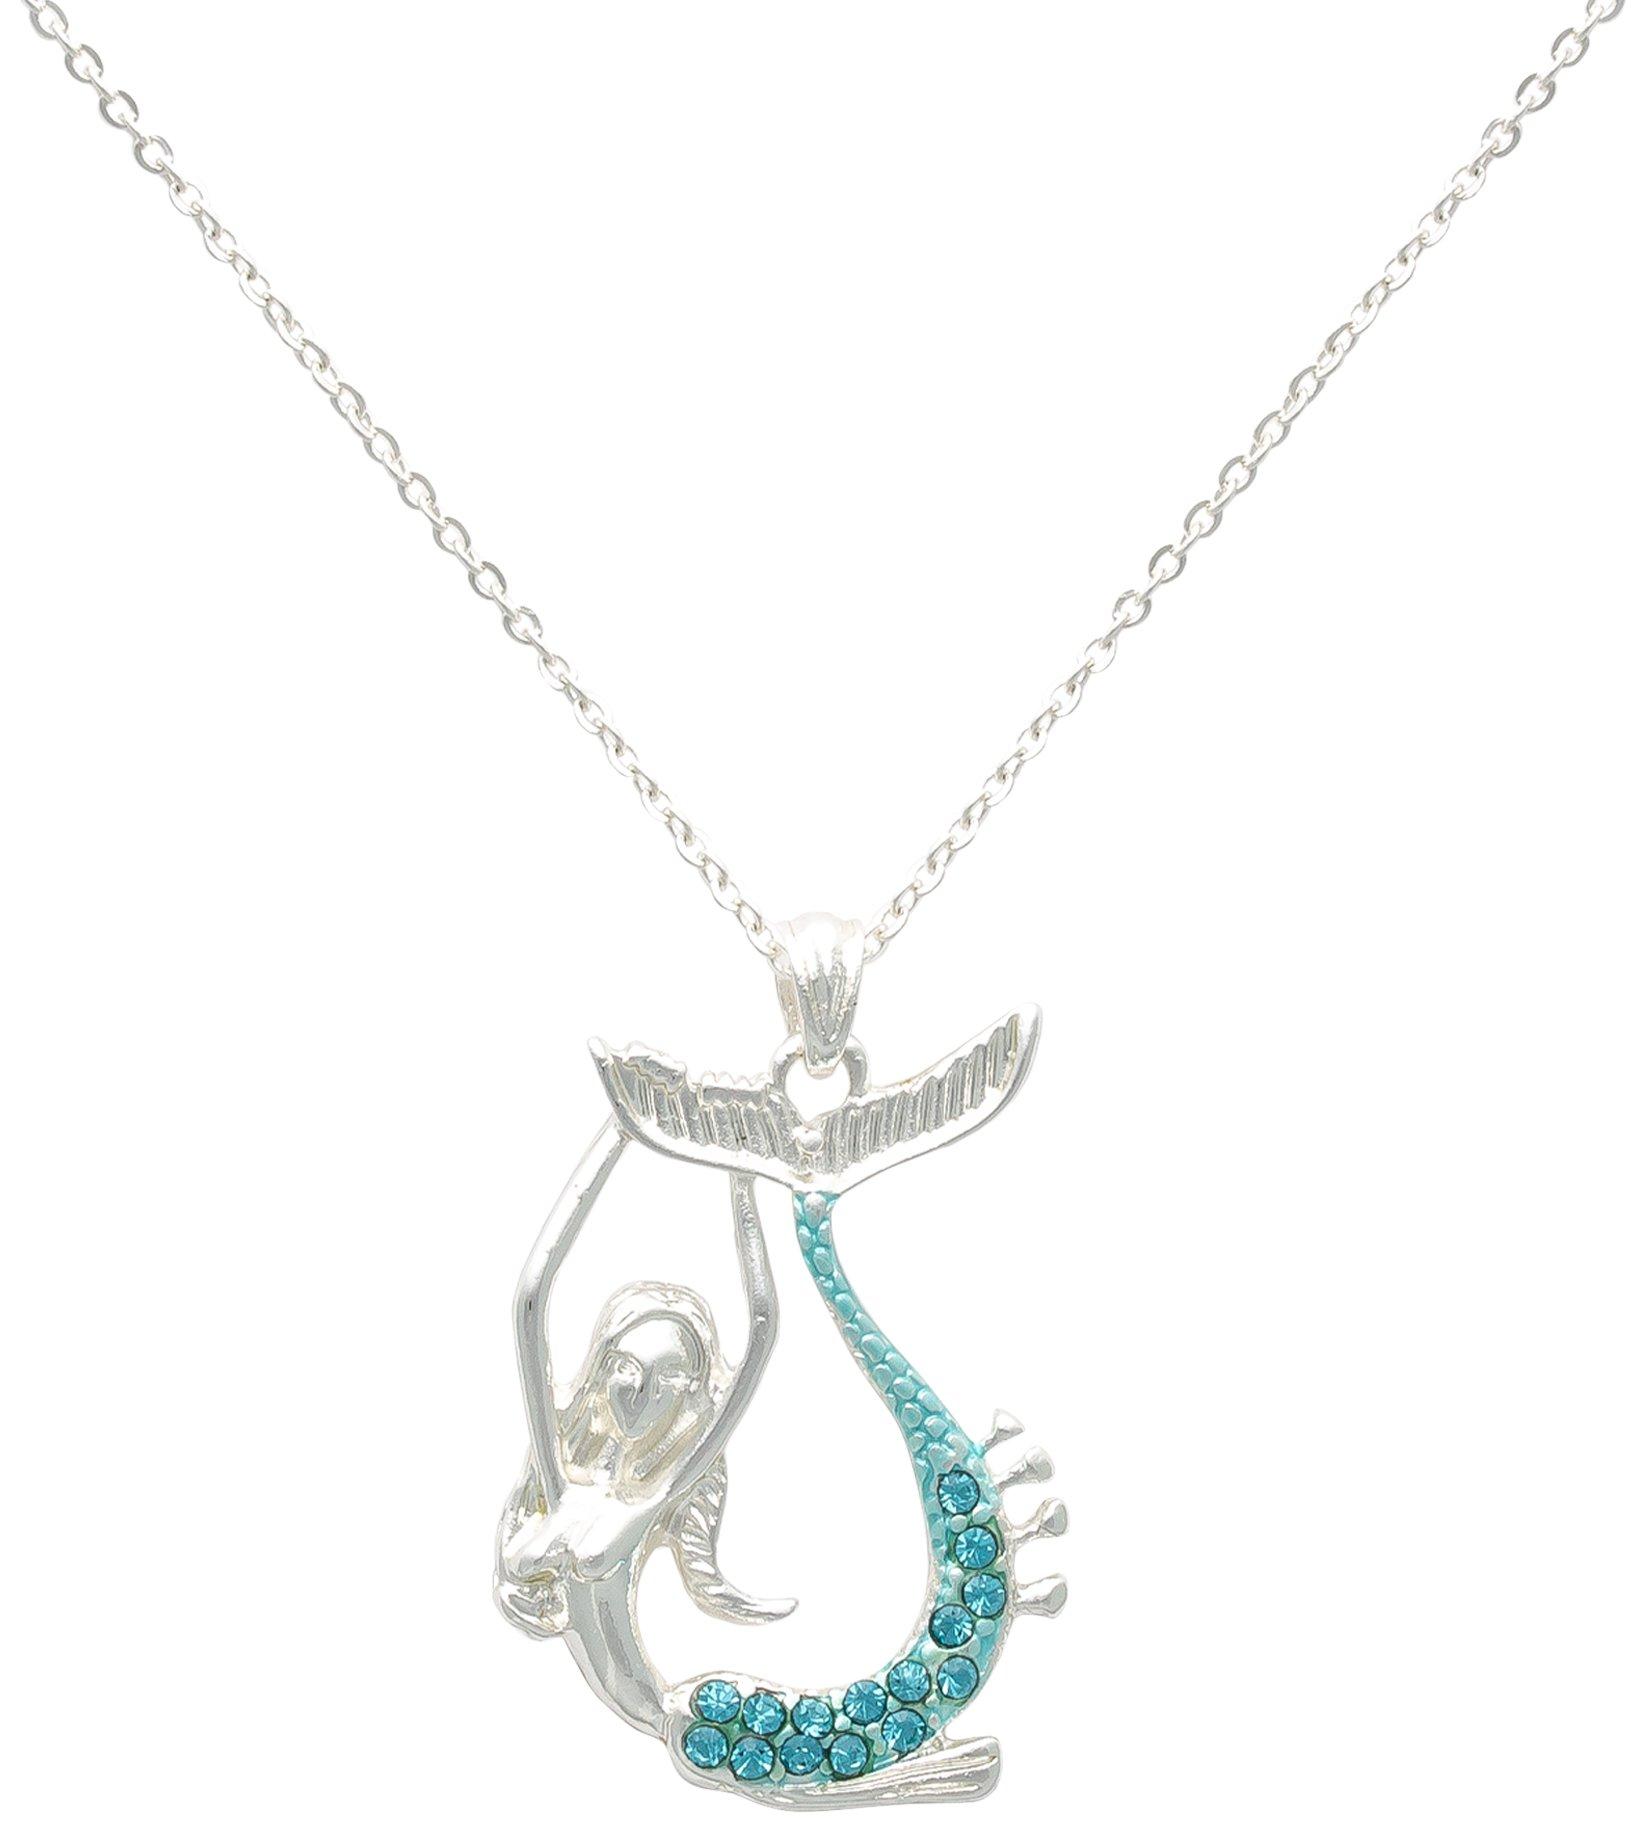 Beach Chic 18 In. Pave Mermaid Chain Necklace